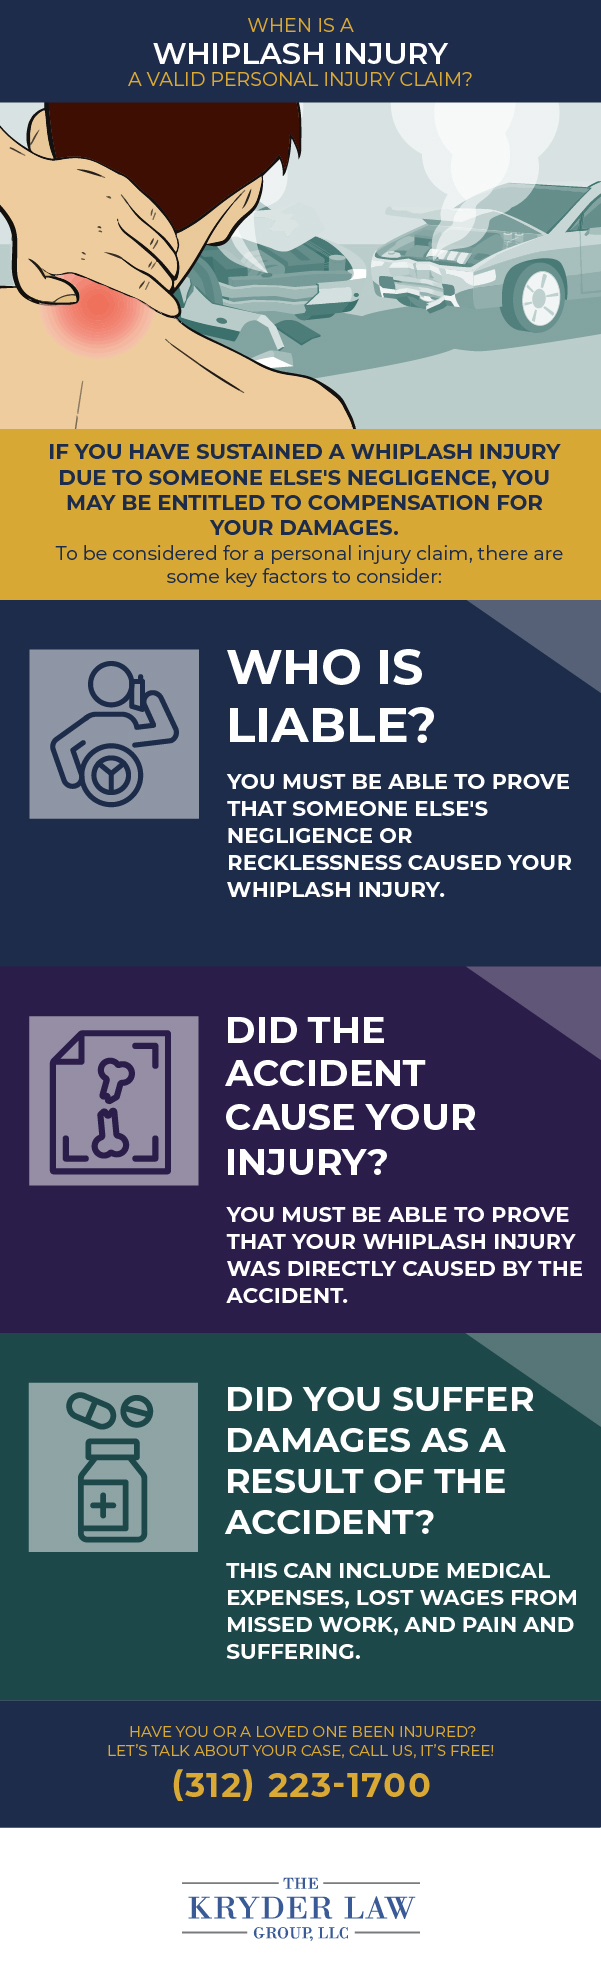 When Is a Whiplash Injury a Valid Personal Injury Claim?